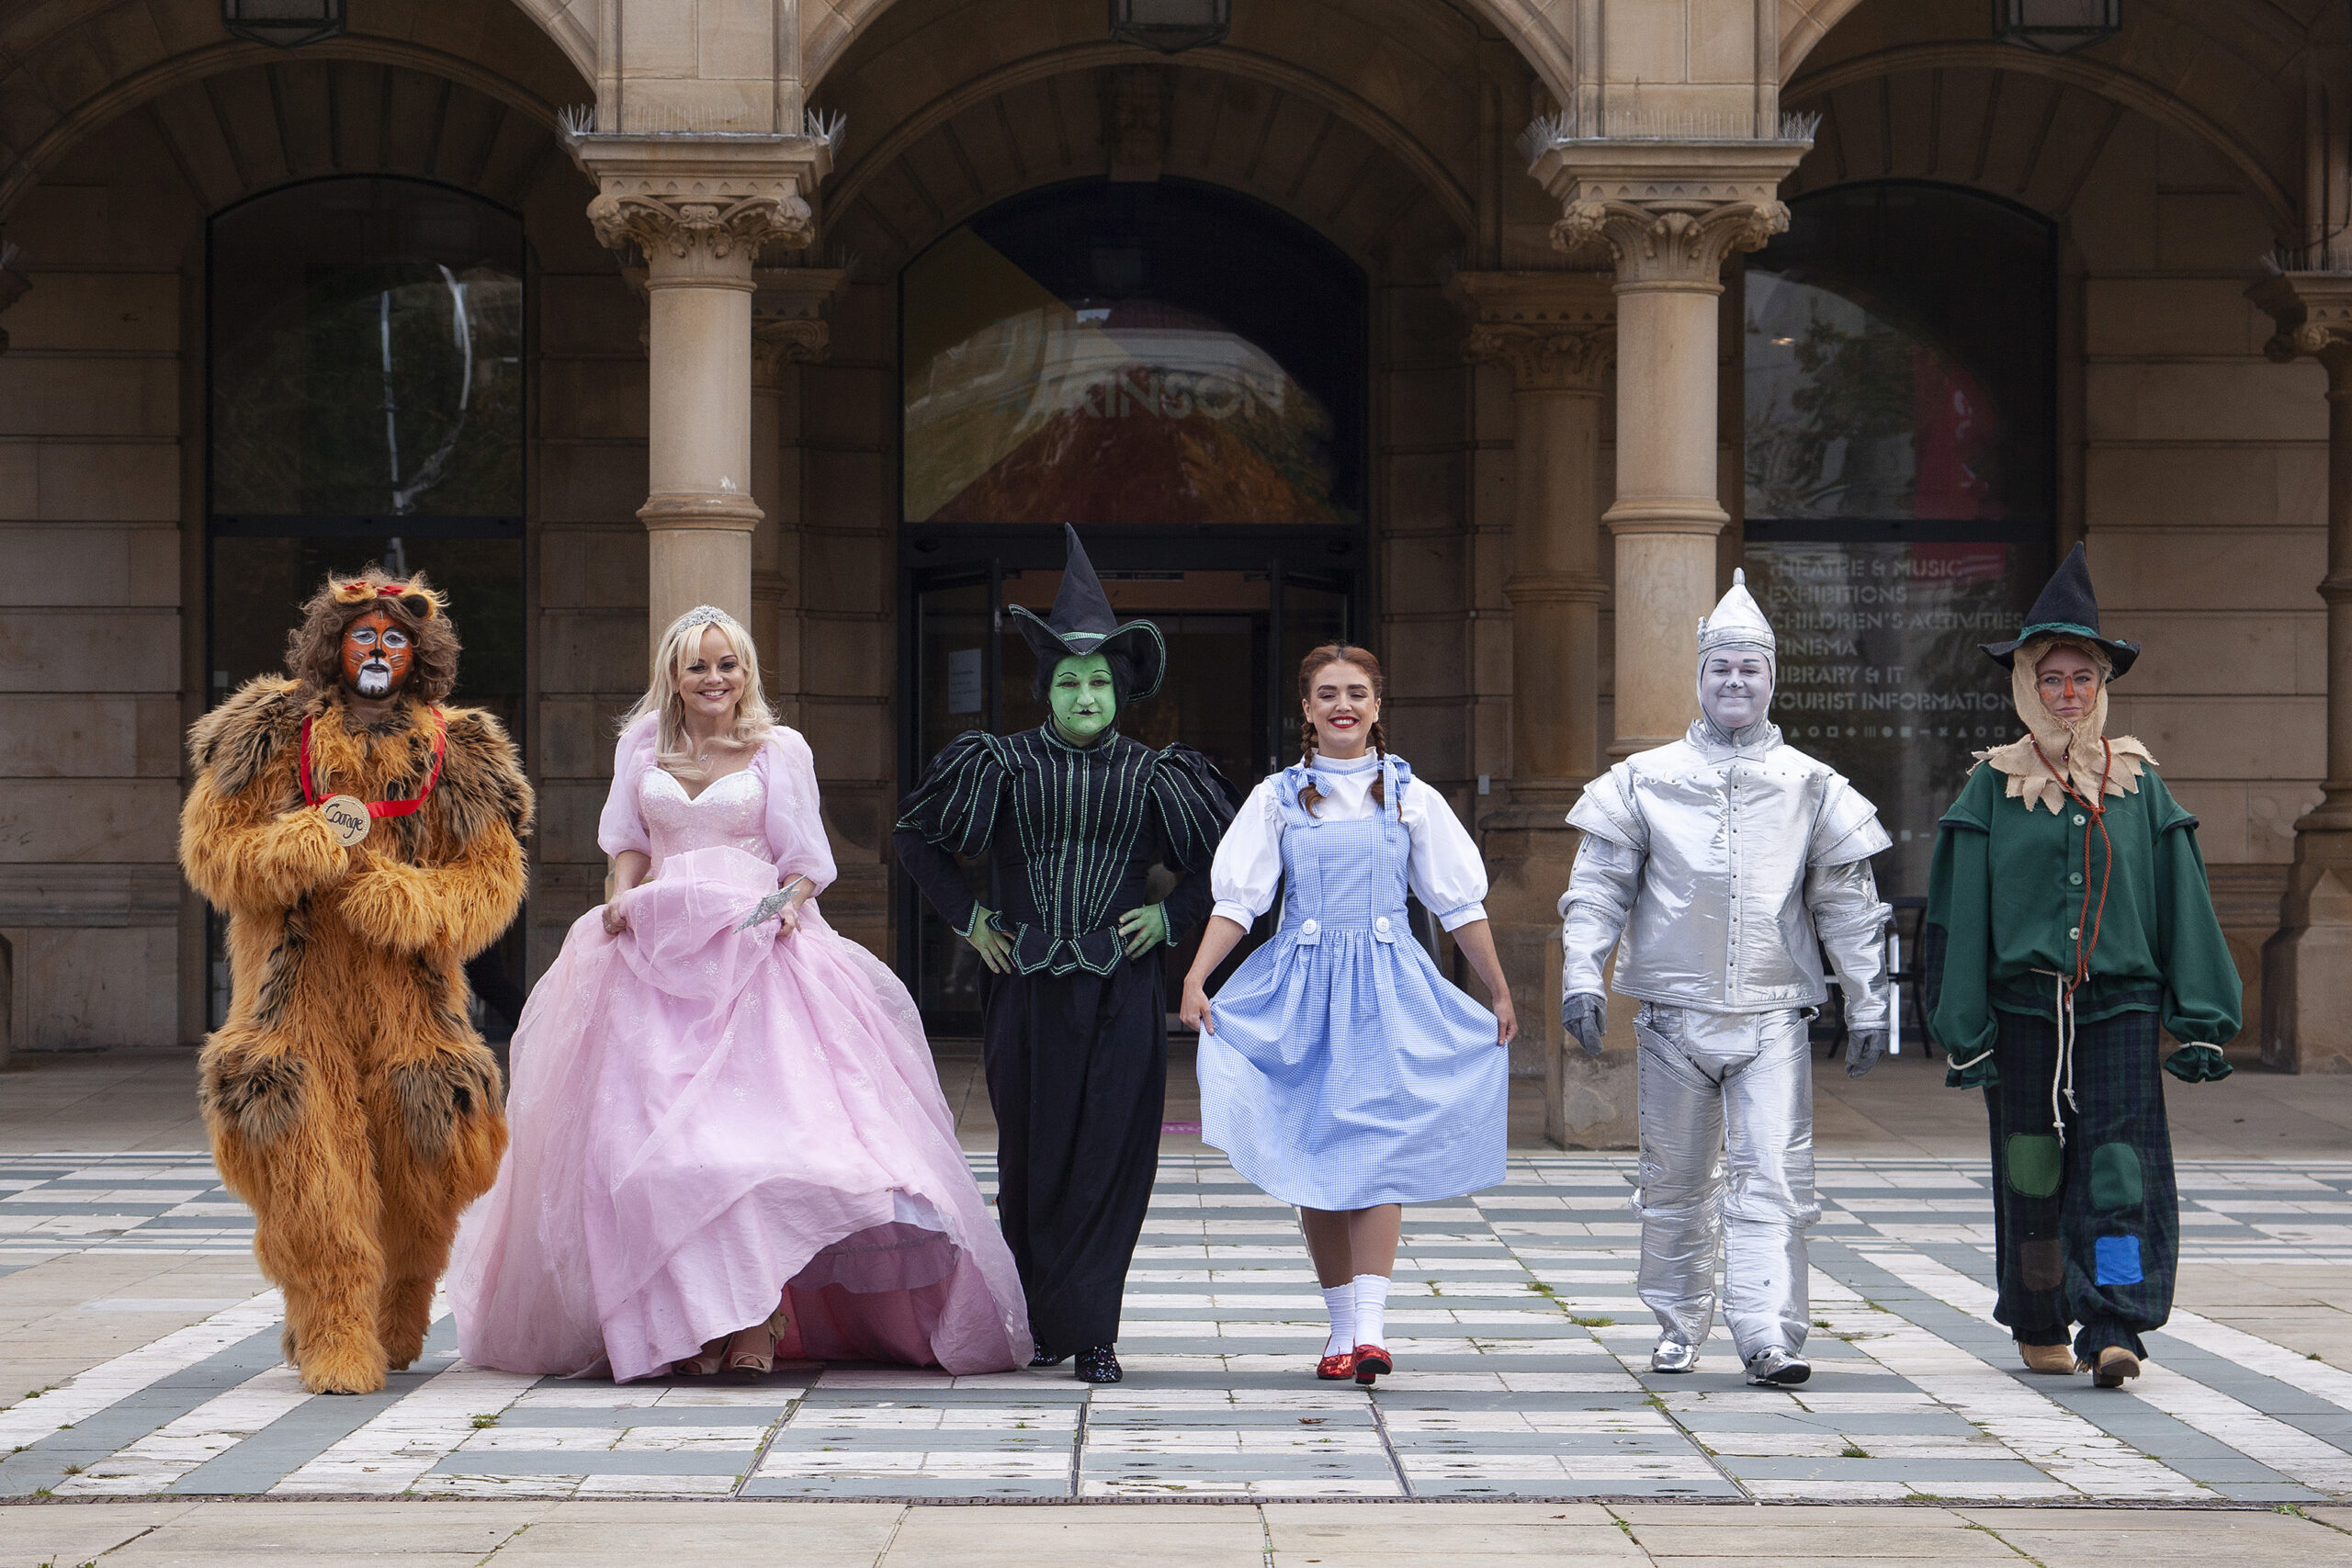 The Wizard Of Oz pantomime is coming to The Atkinson in Southport on December 18-31